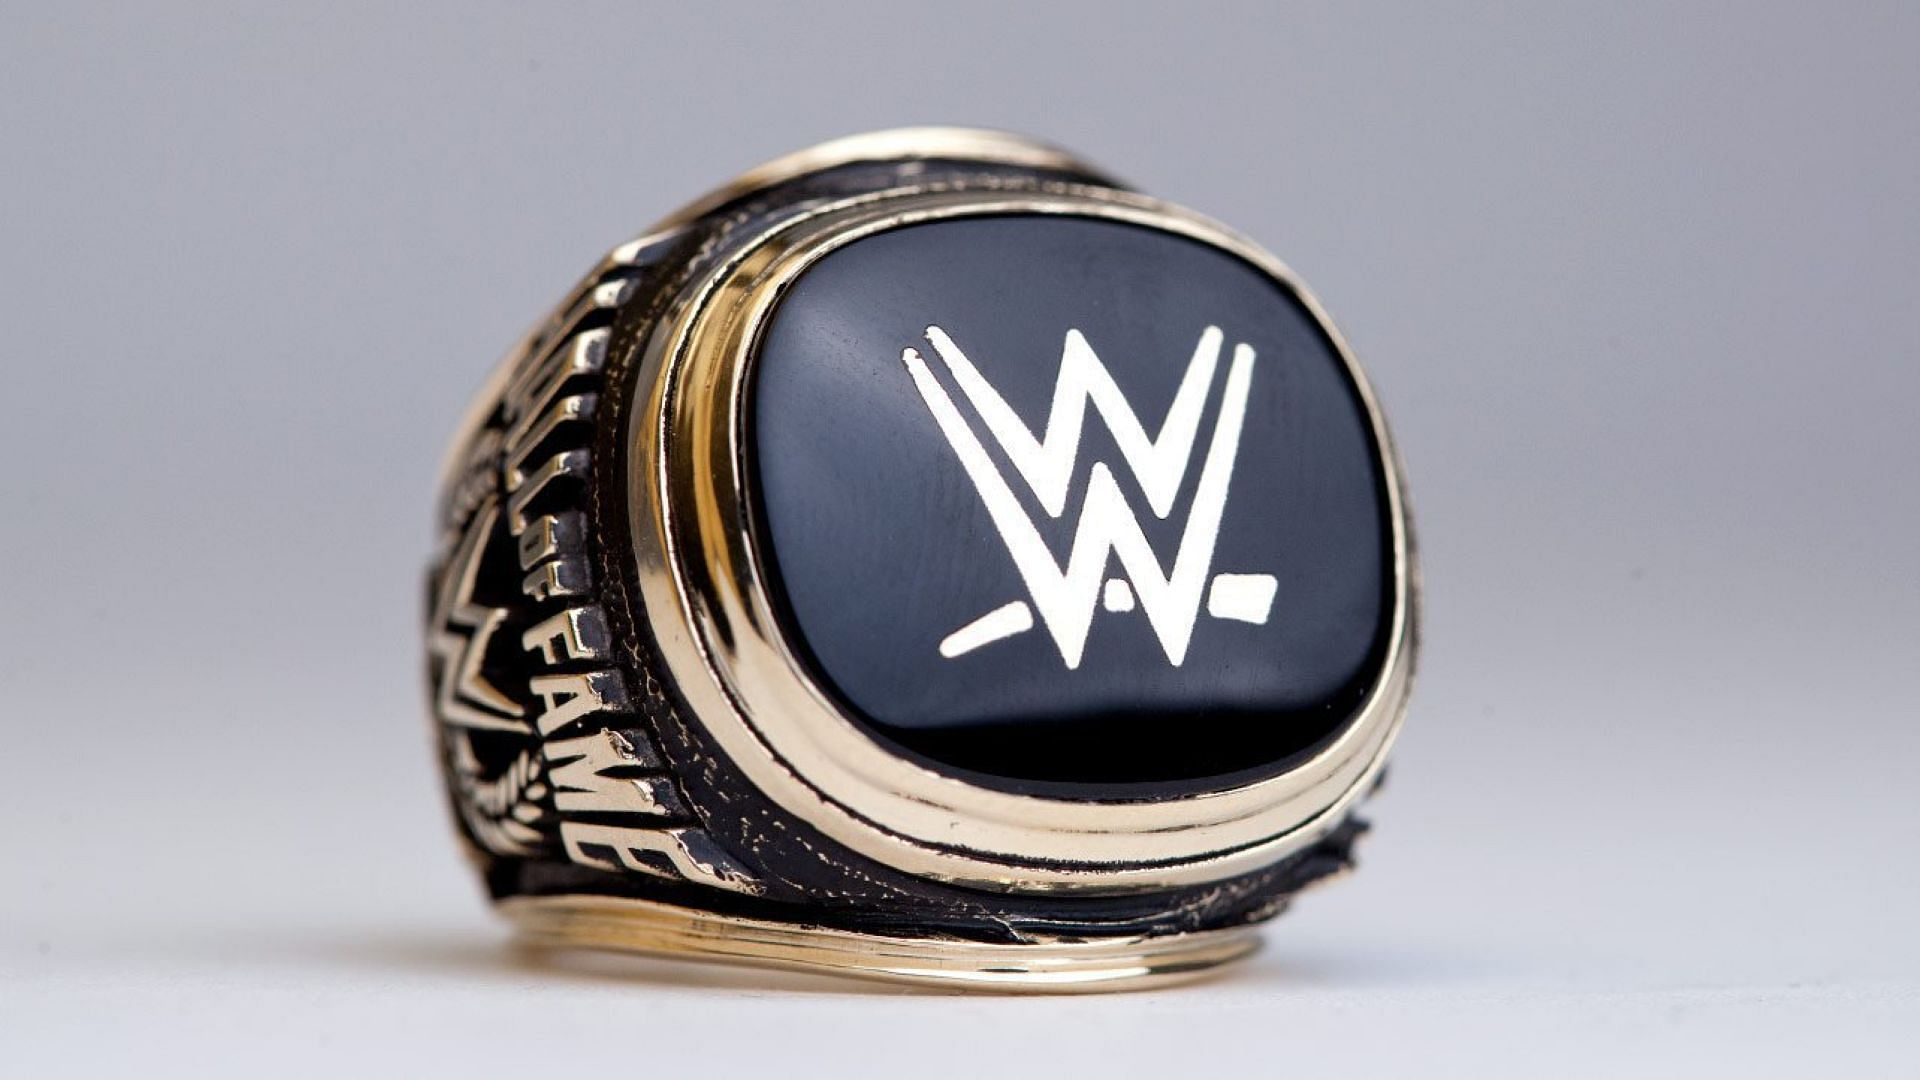 An official WWE Hall of Fame ring on display